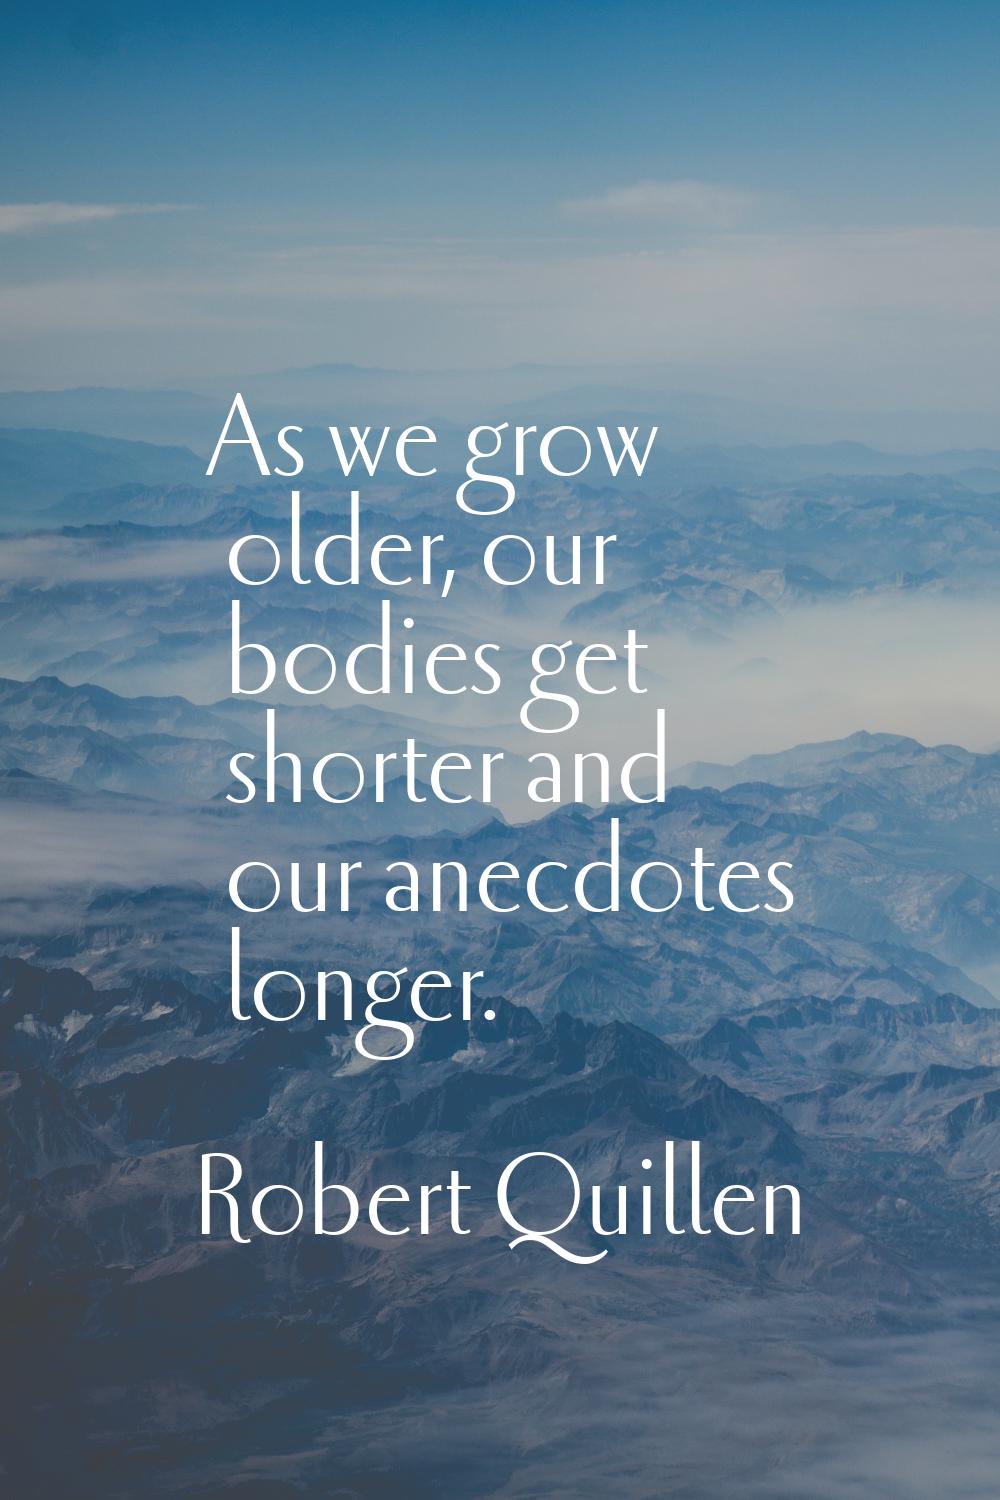 As we grow older, our bodies get shorter and our anecdotes longer.